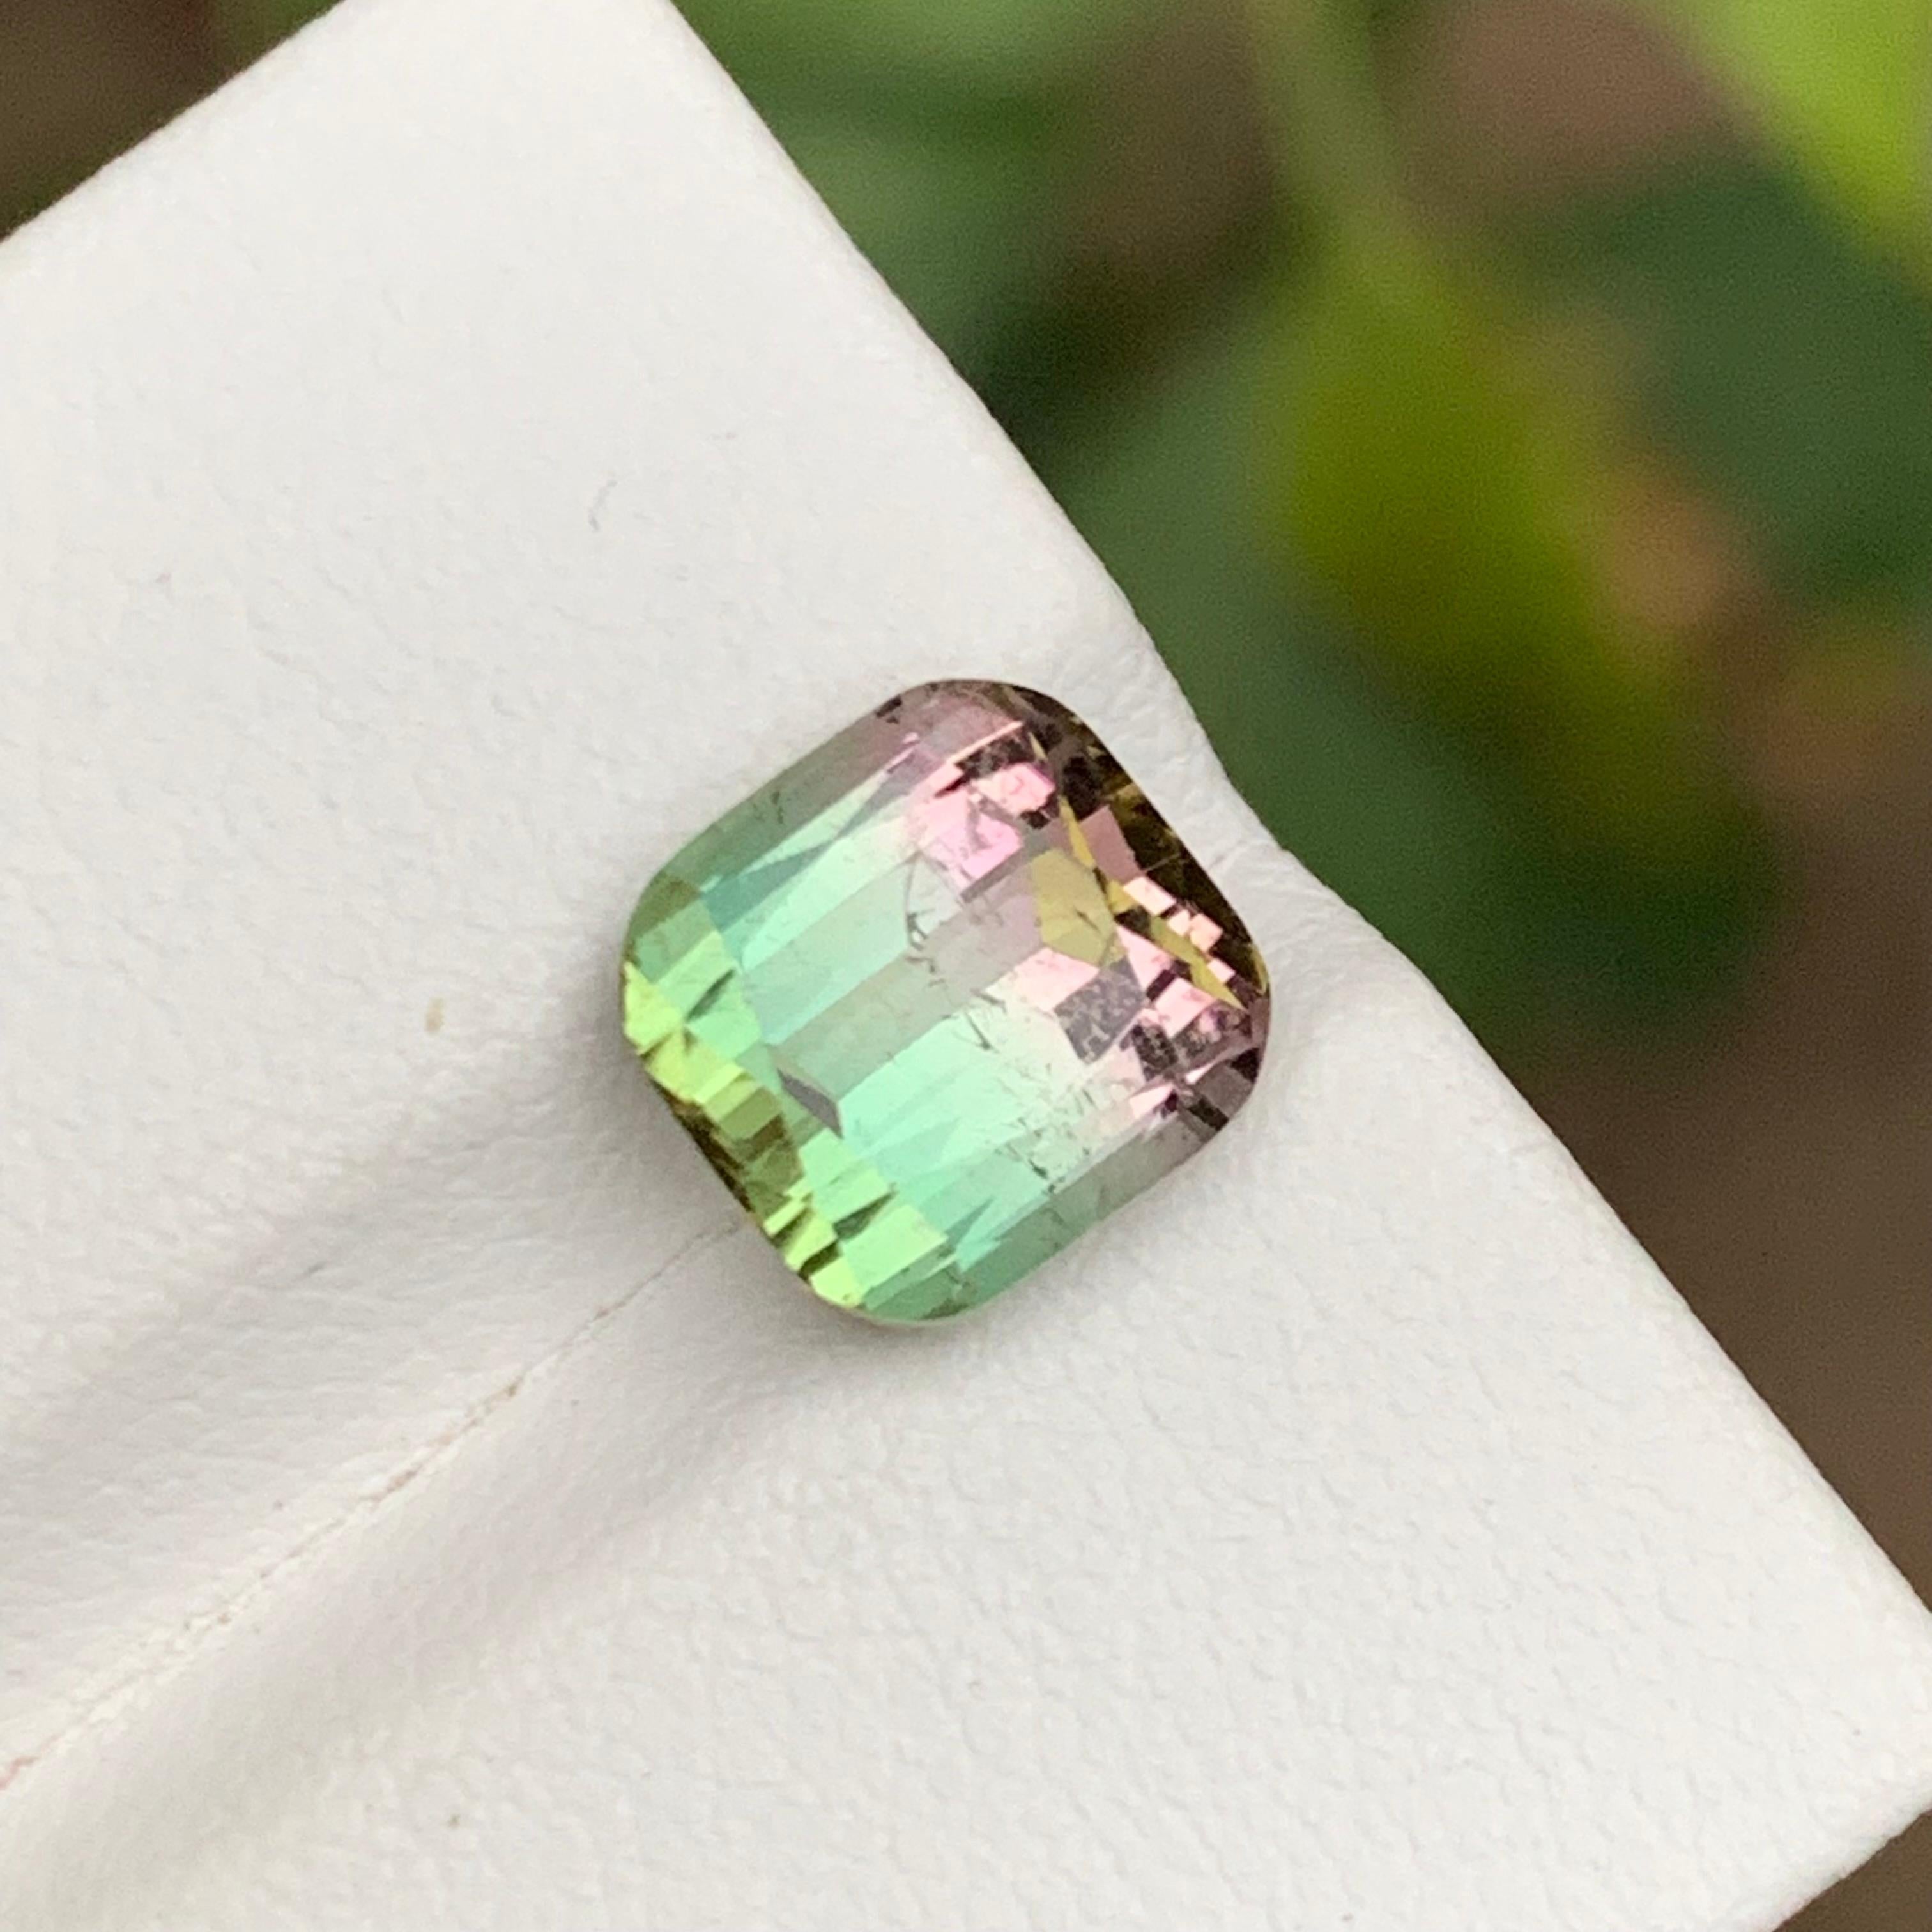 Rare Watermelon Bicolor Natural Tourmaline Gemstone 3.65 Ct Cushion Cut for Ring For Sale 3